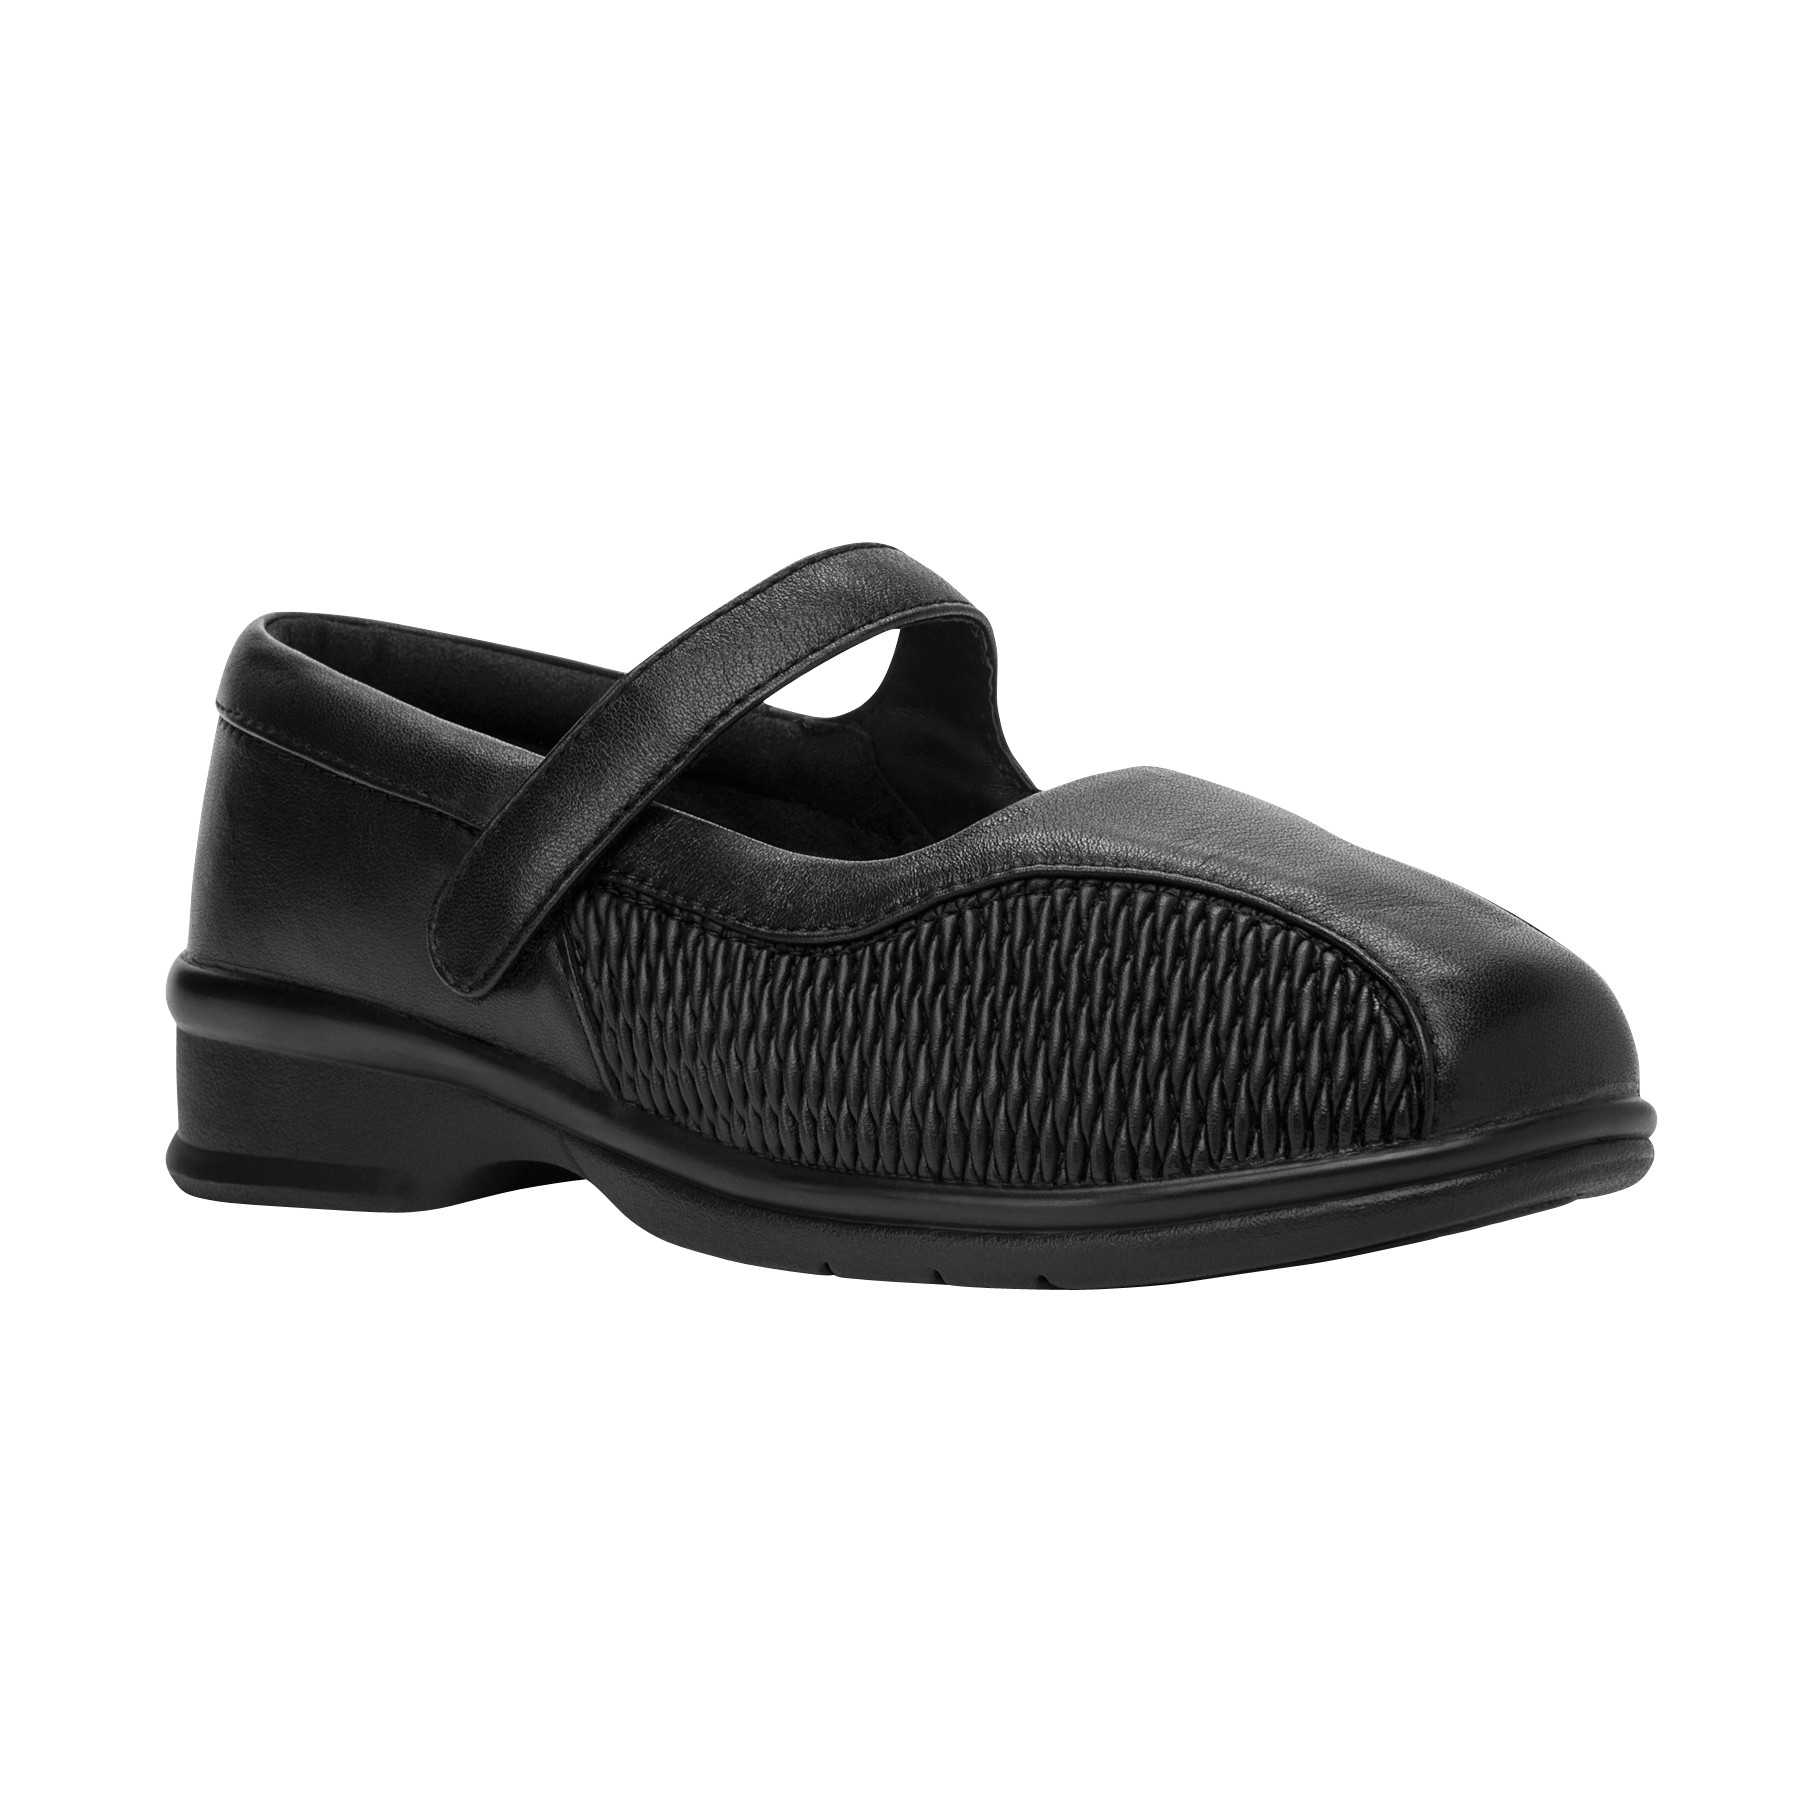 Women's Erika Black Mary Jane Shoe - Wide Widths Available